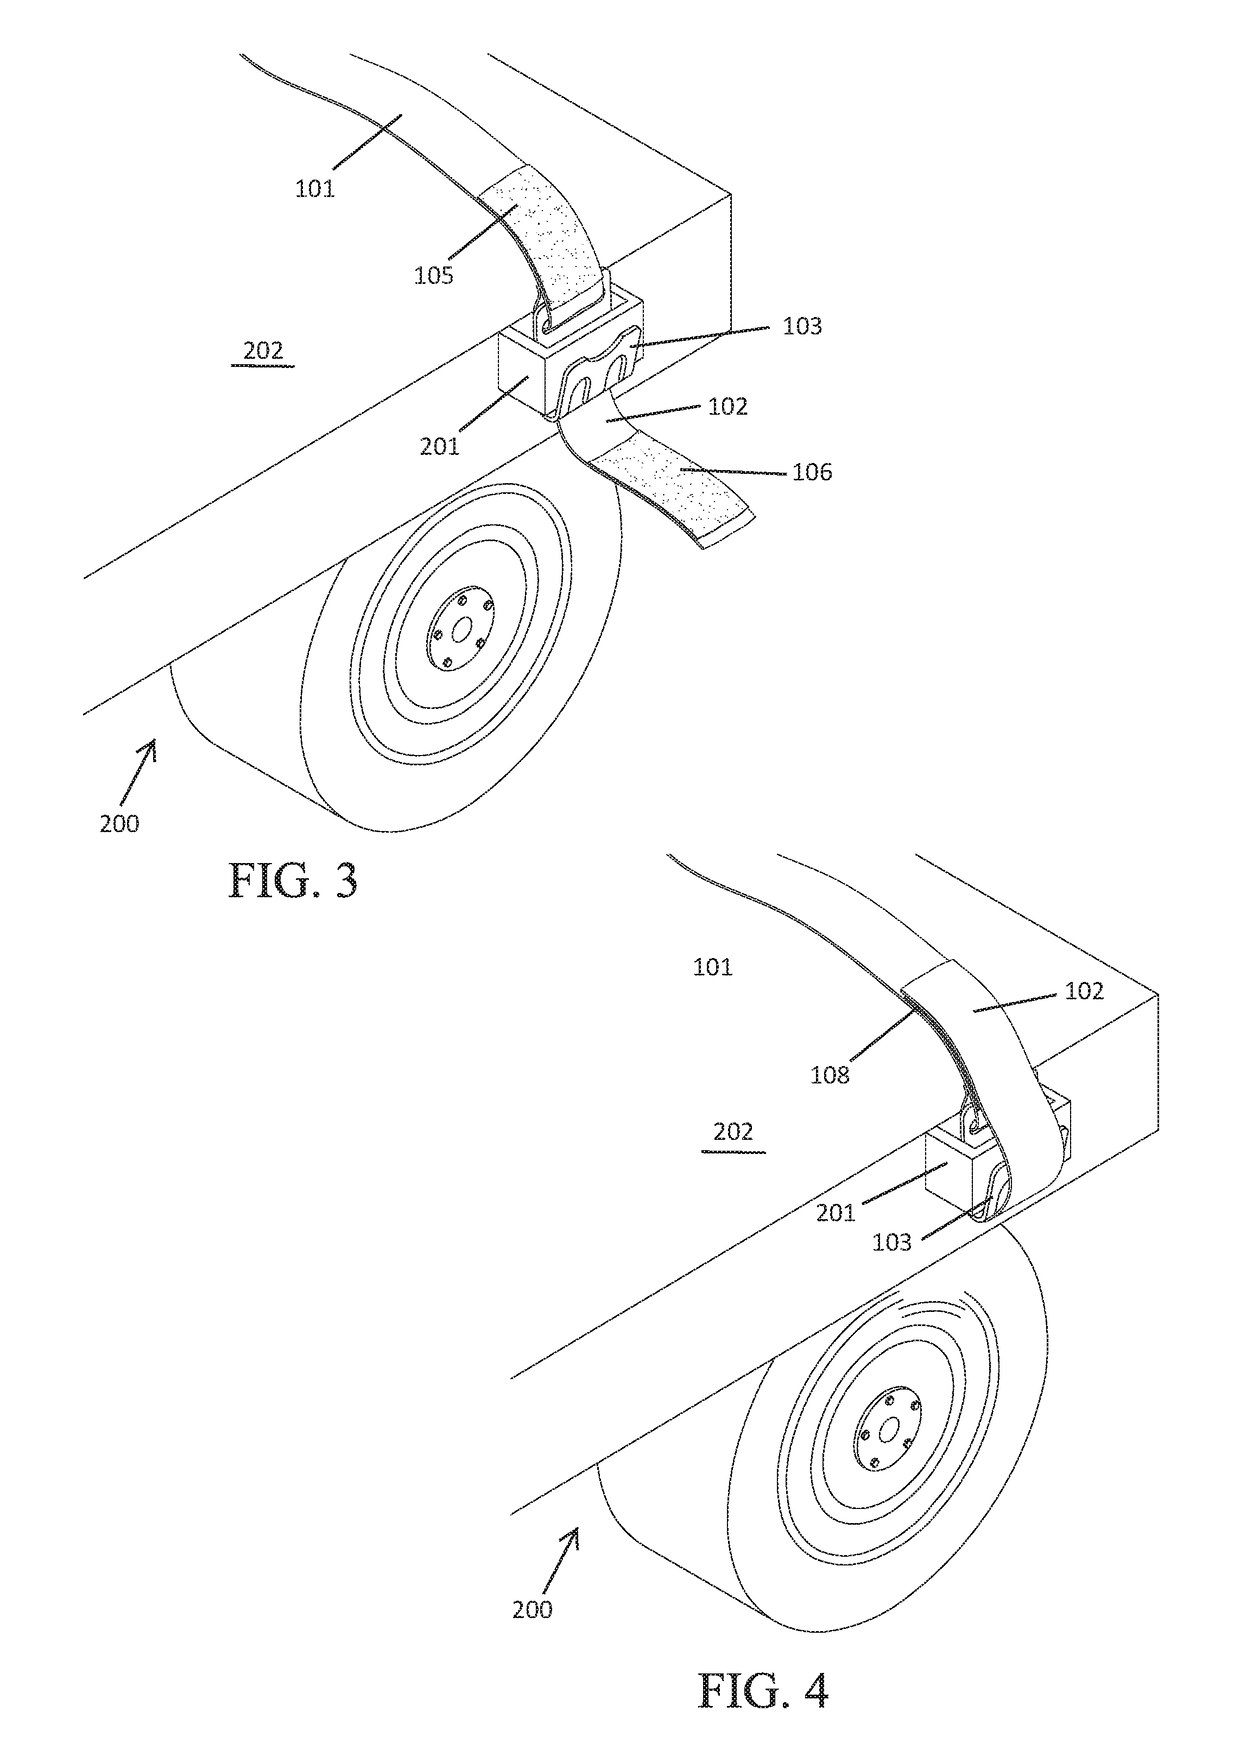 Tie Down Strap with Strap Loop for Preventing Disengagement while Securing Cargo